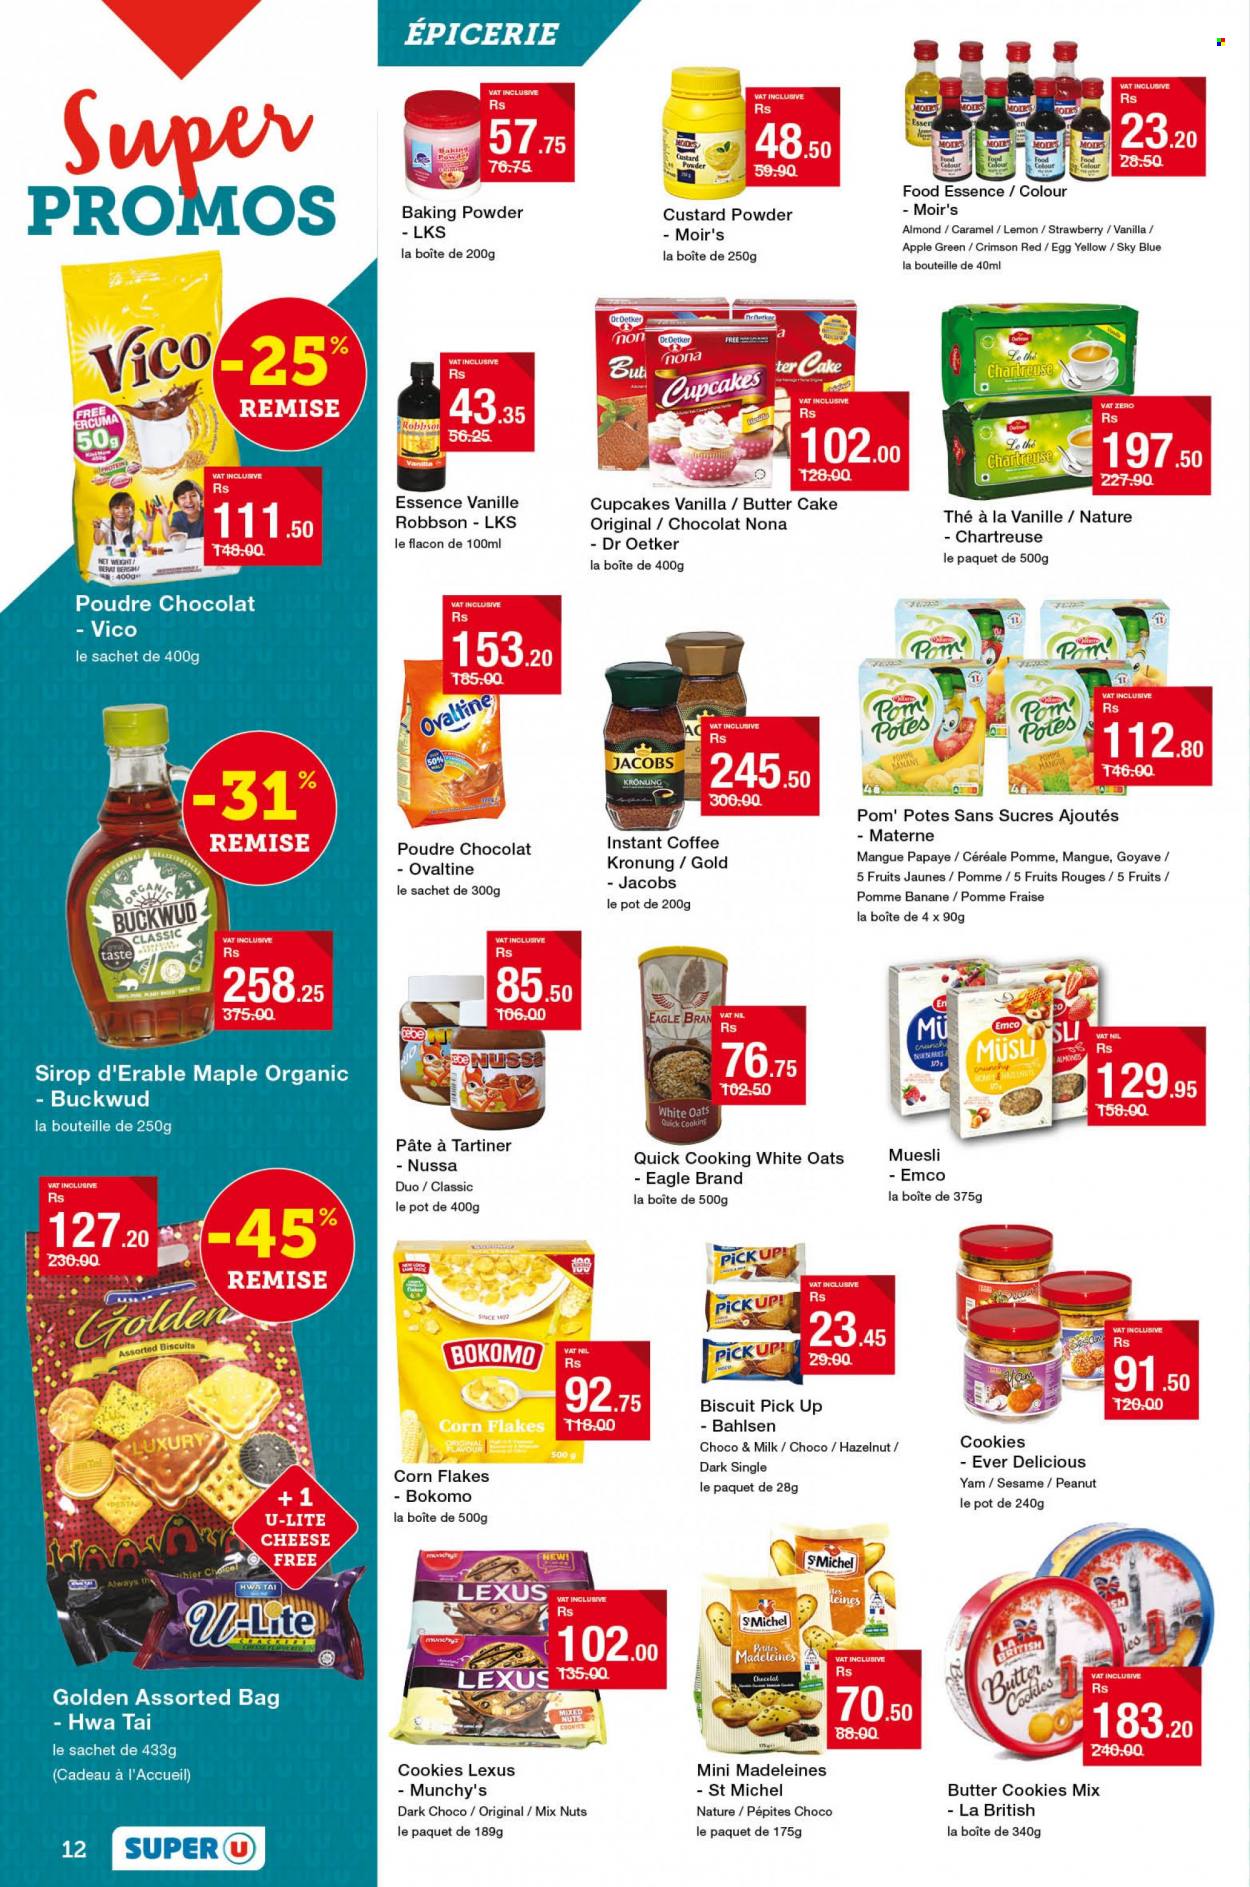 thumbnail - Super U Catalogue - 21.03.2023 - 9.04.2023 - Sales products - cake, cupcake, blueberries, cheese, Dr. Oetker, custard, milk, eggs, cookies, butter cookies, biscuit, baking powder, oats, corn flakes, muesli, caramel, almonds, mixed nuts, coffee, instant coffee, Jacobs, Jacobs Krönung, bag, pot. Page 12.